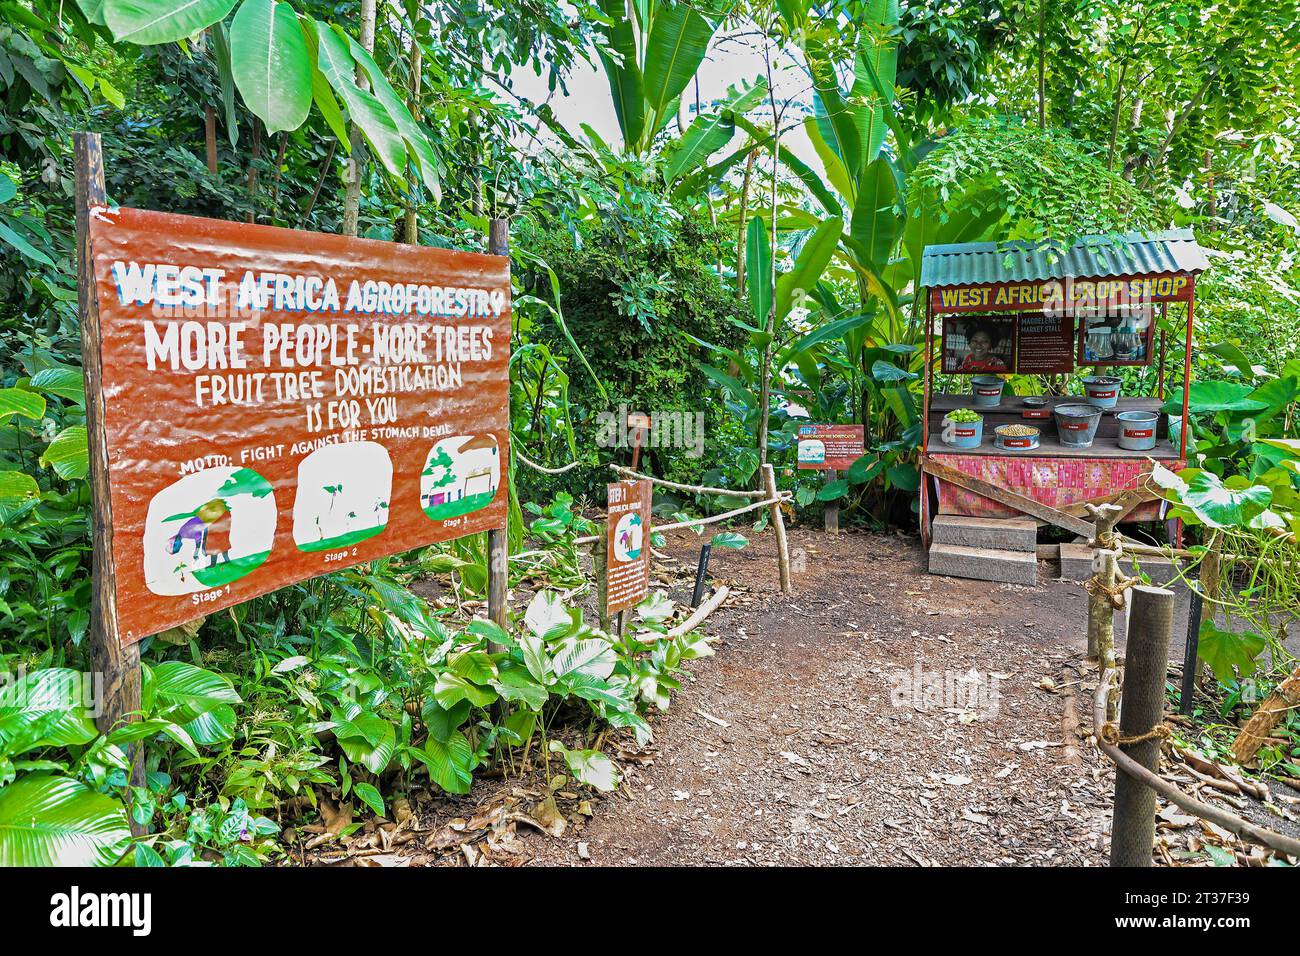 A sign for the West Africa Agroforestry project inside the Rainforest Biome at the Eden Project, near St Austell, Cornwall, England, United Kingdom UK Stock Photo